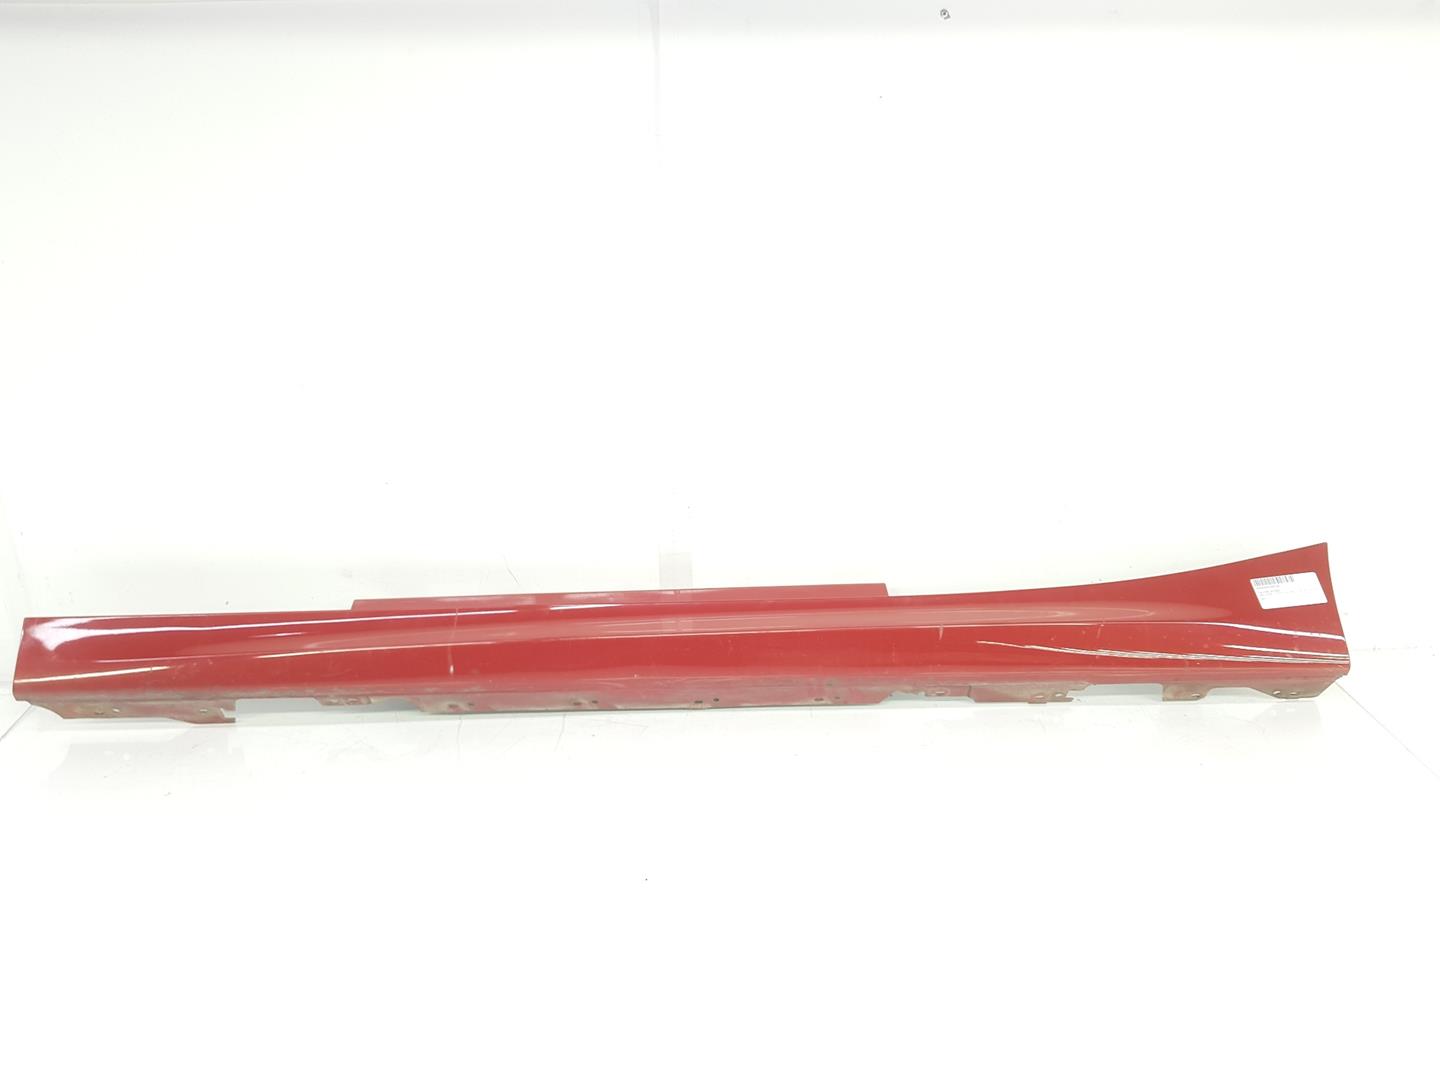 BMW 2 Series F22/F23 (2013-2020) Other Body Parts 51778051947, 51778056817, COLORROJOA75 19850131